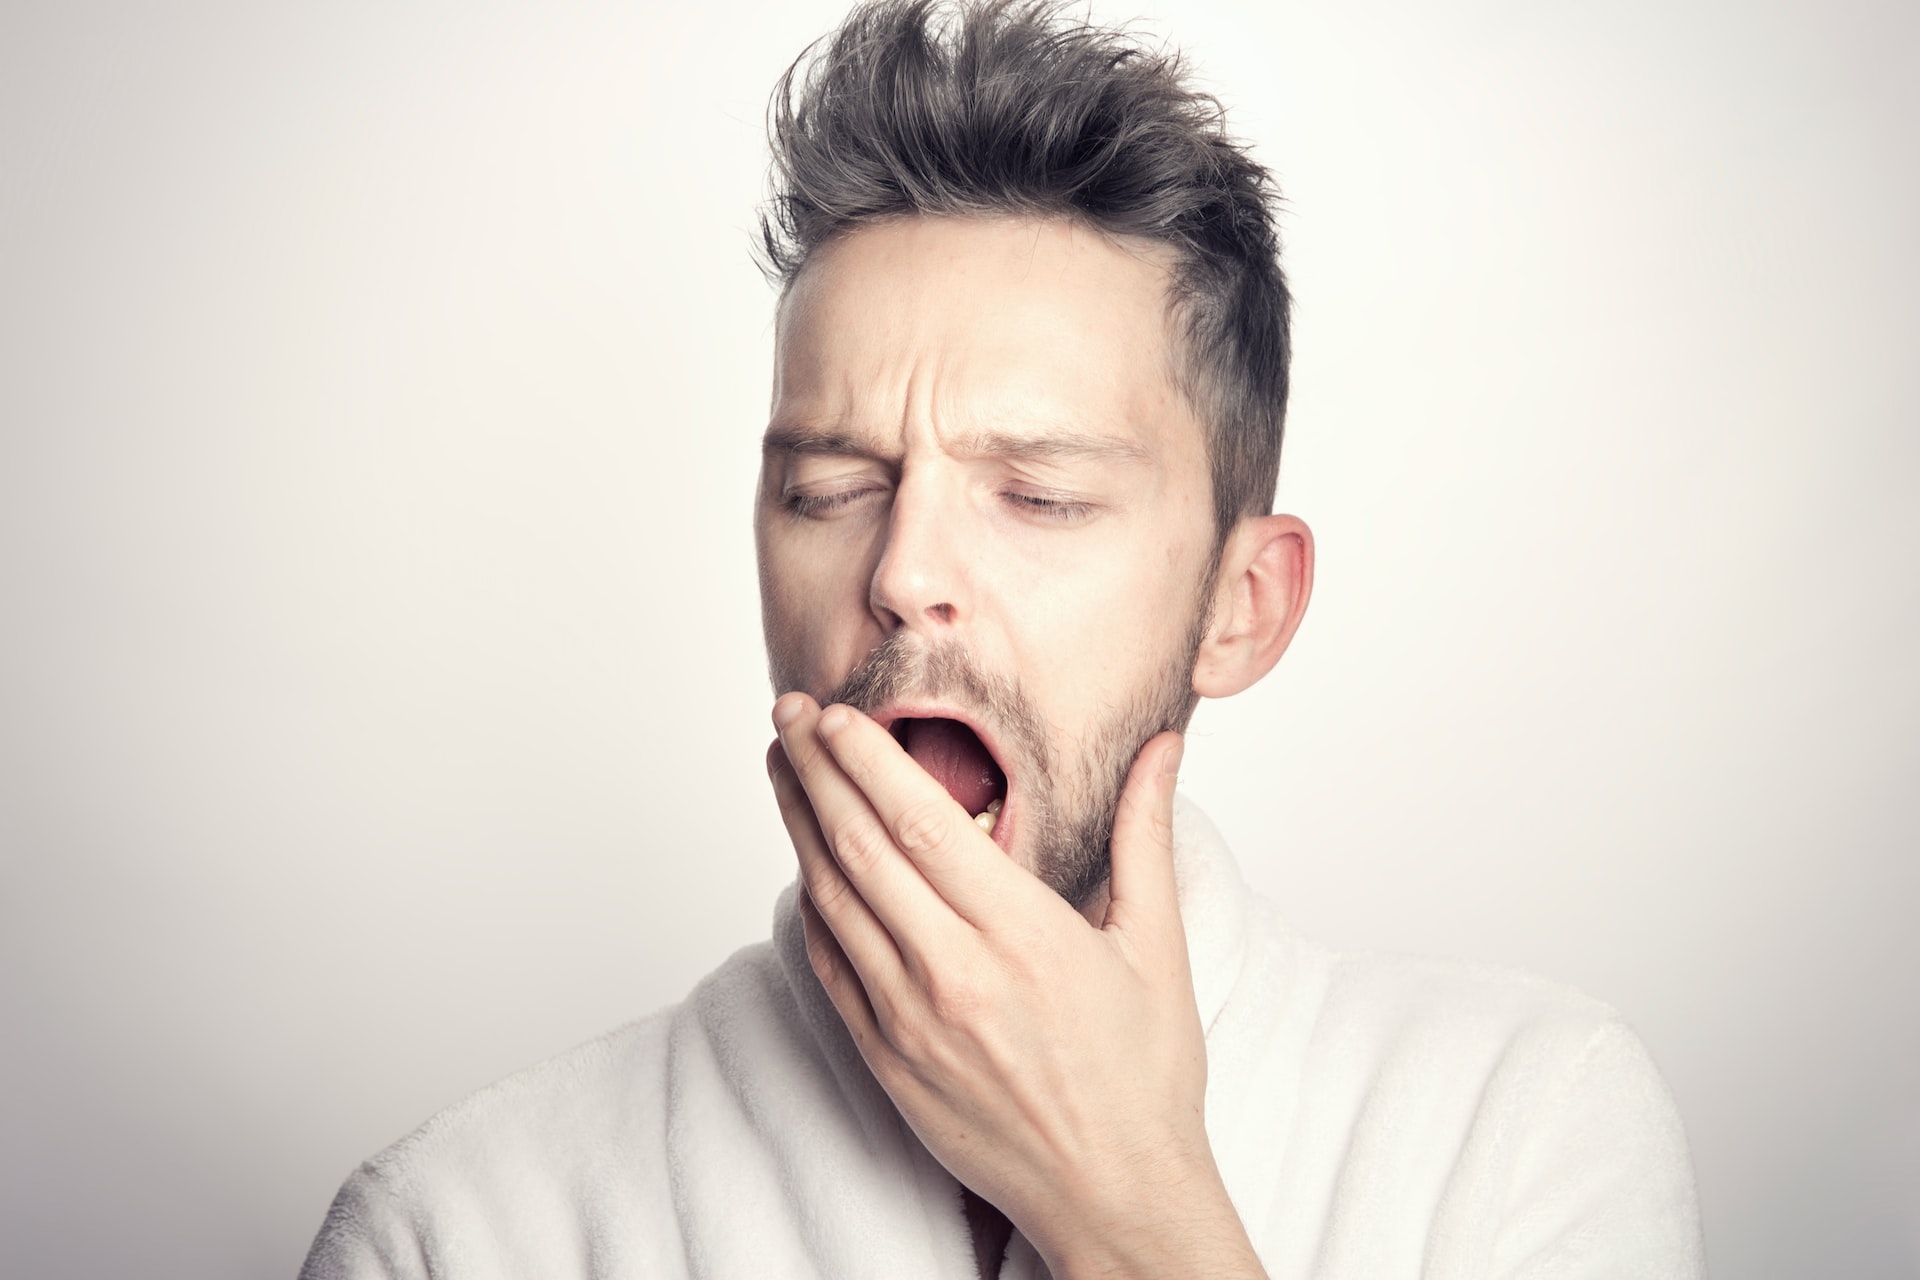 A man yawning widely after getting a deep sleep